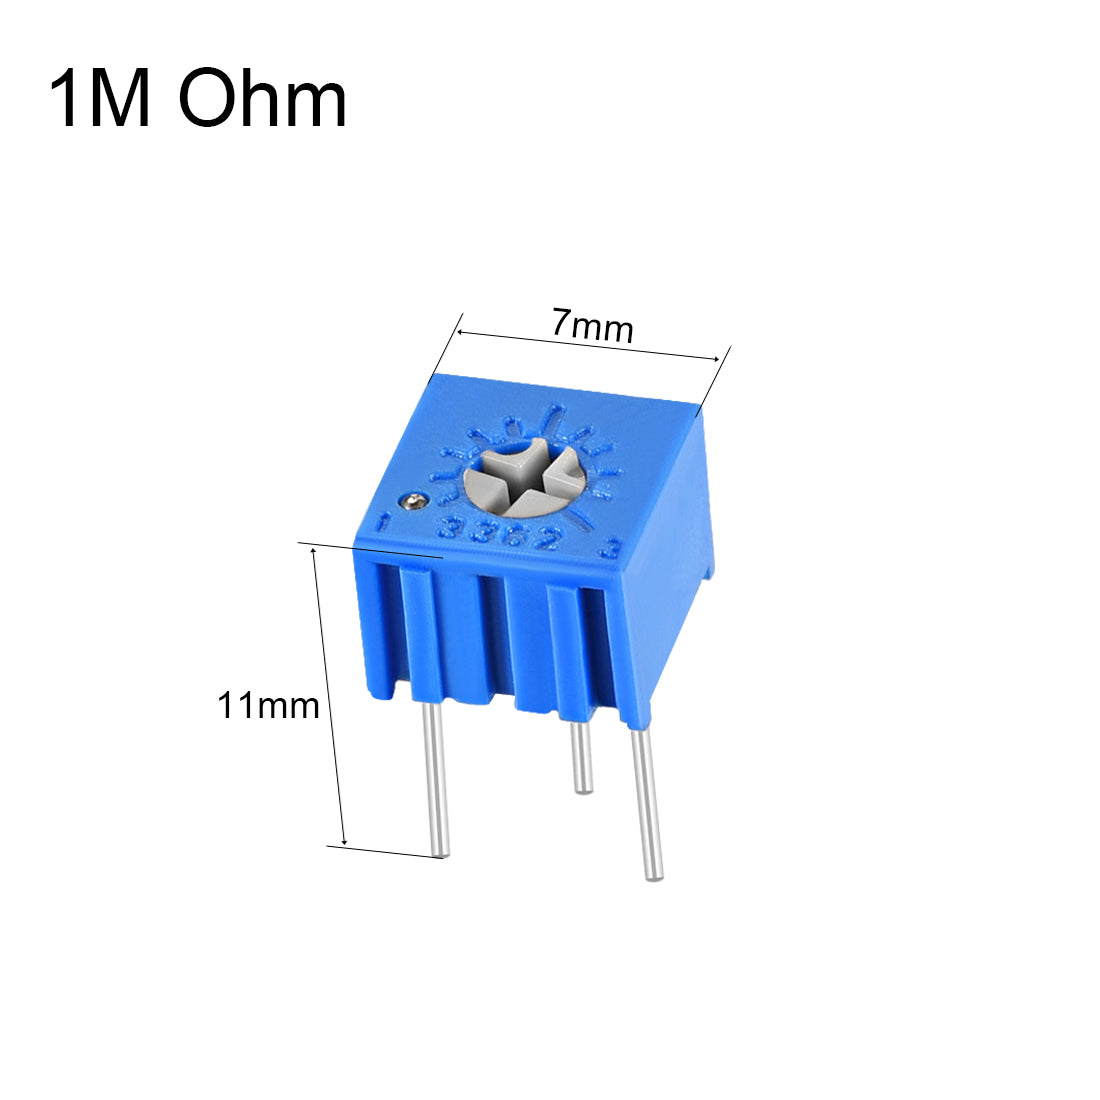 uxcell Uxcell 3362 Trimmer Potentiometer 1M Ohm Top Adjustment Horizontal Variable Resistors 10Pcs